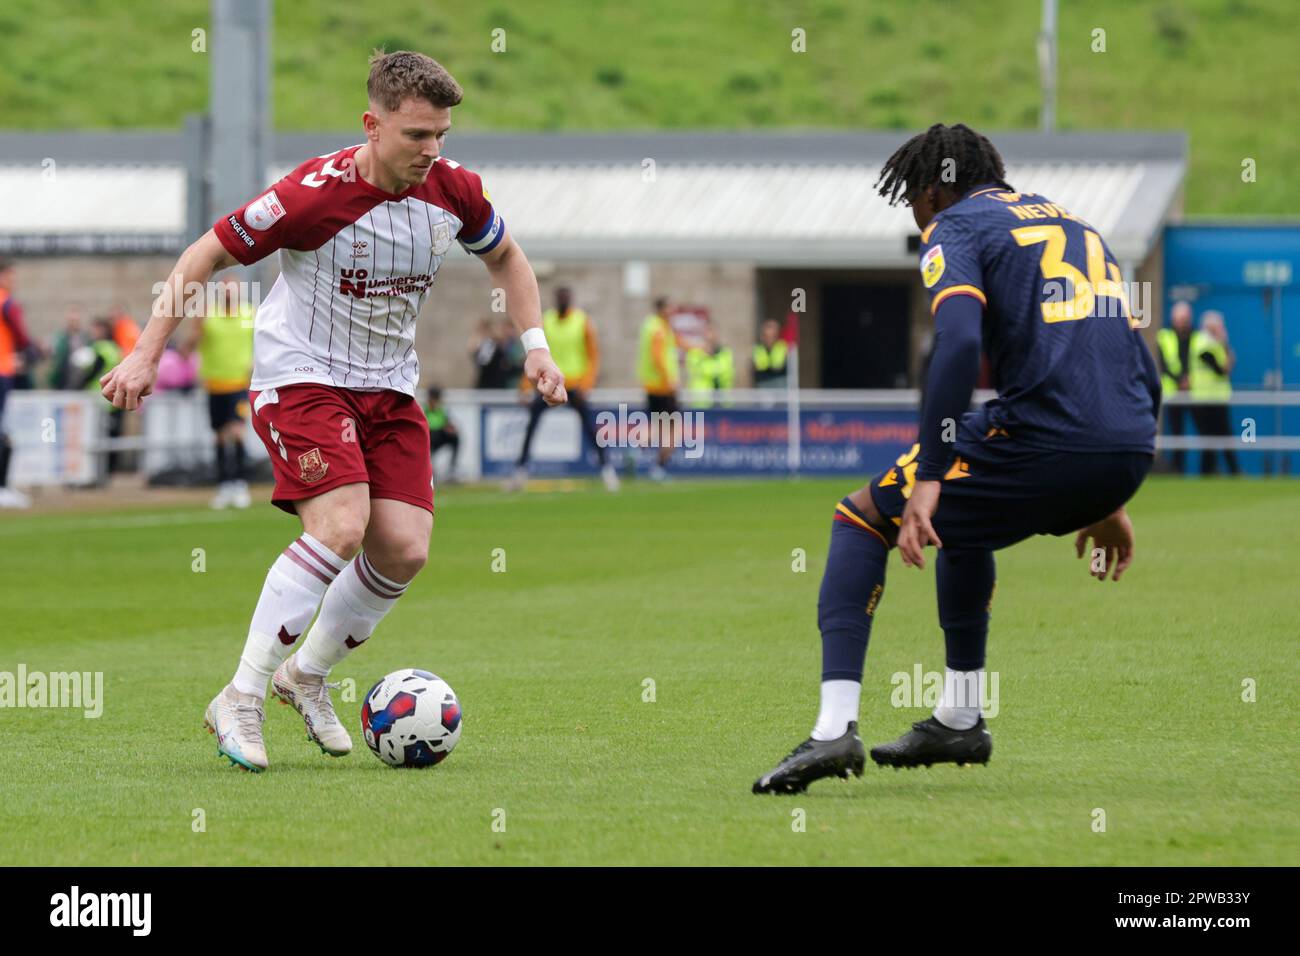 Northampton Town's captain Sam Hoskins takes on Bradford City's Thierry Nevers during the first half of the Sky Bet League 2 match between Northampton Town and Bradford City at the PTS Academy Stadium, Northampton on Saturday 29th April 2023. (Photo: John Cripps | MI News) Credit: MI News & Sport /Alamy Live News Stock Photo